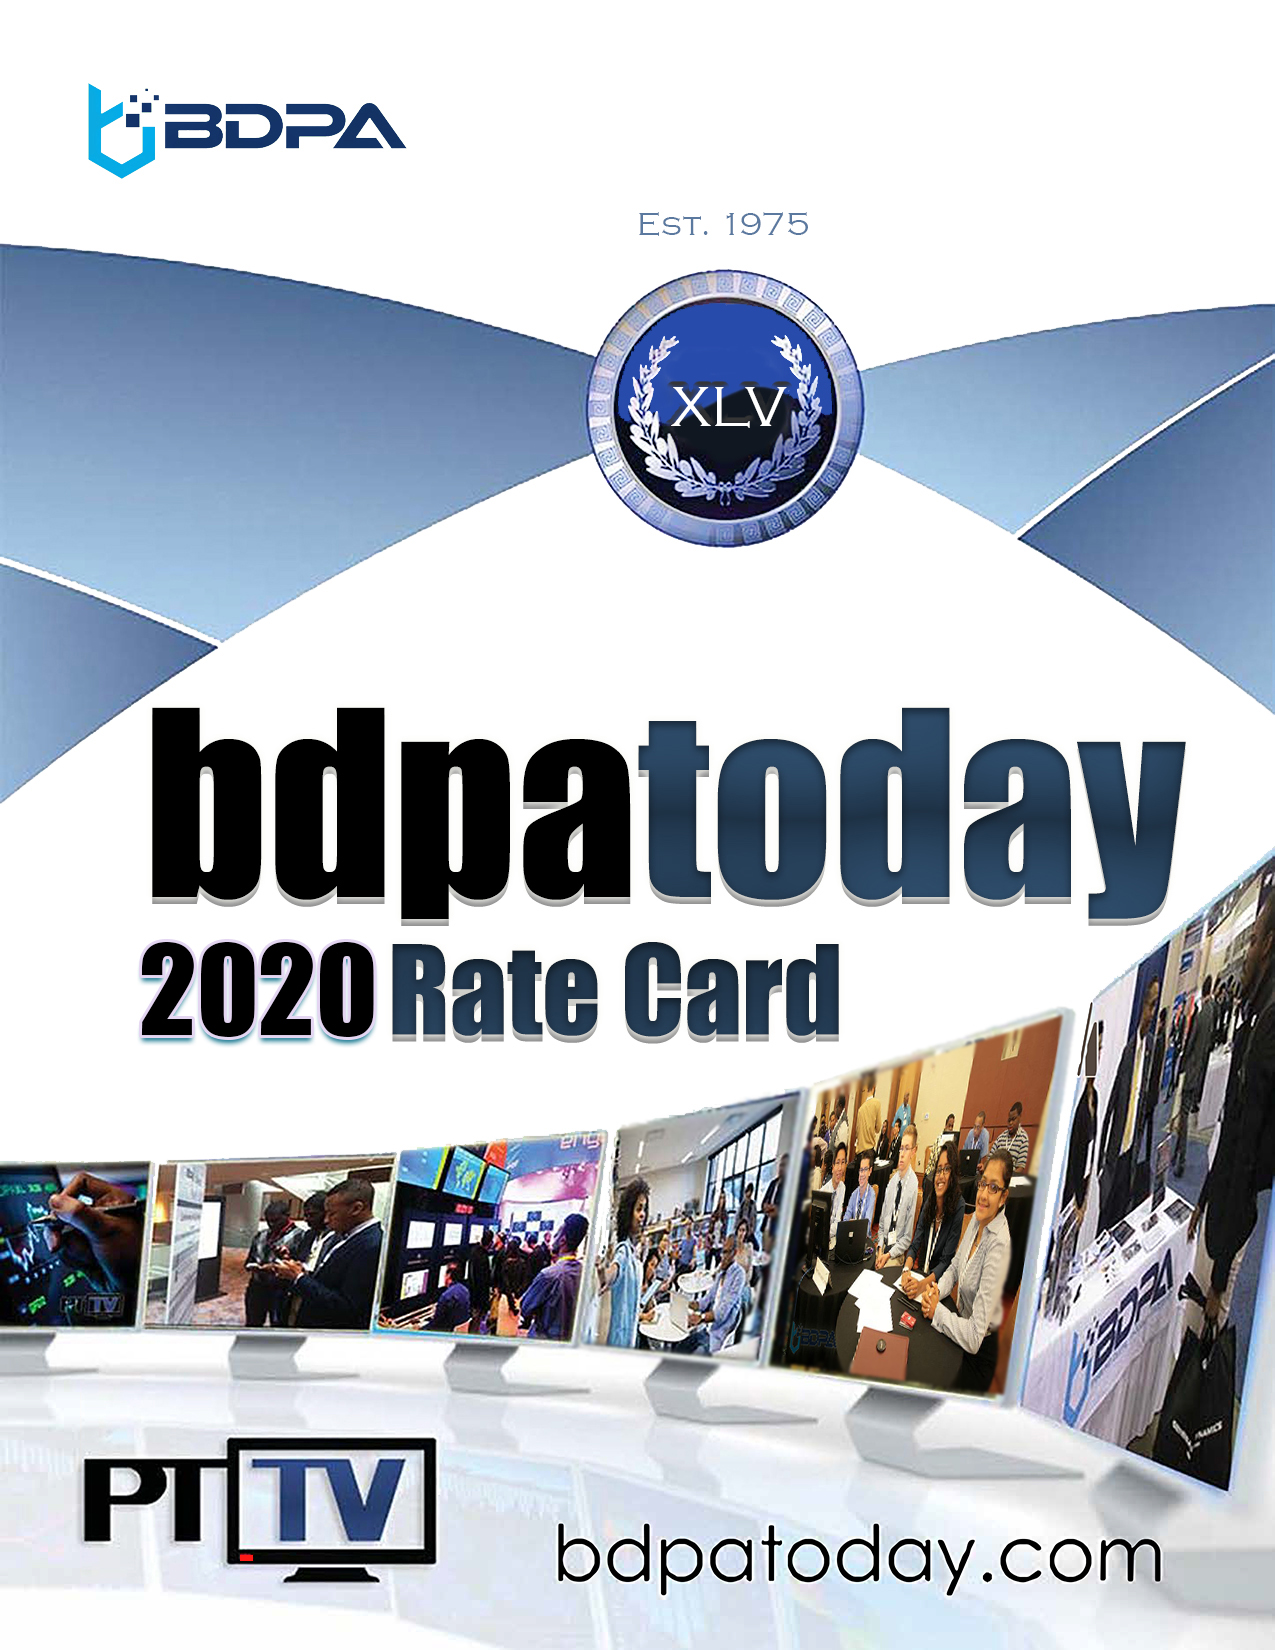 2017 Rate Schedules | PTTV & bdpatoday